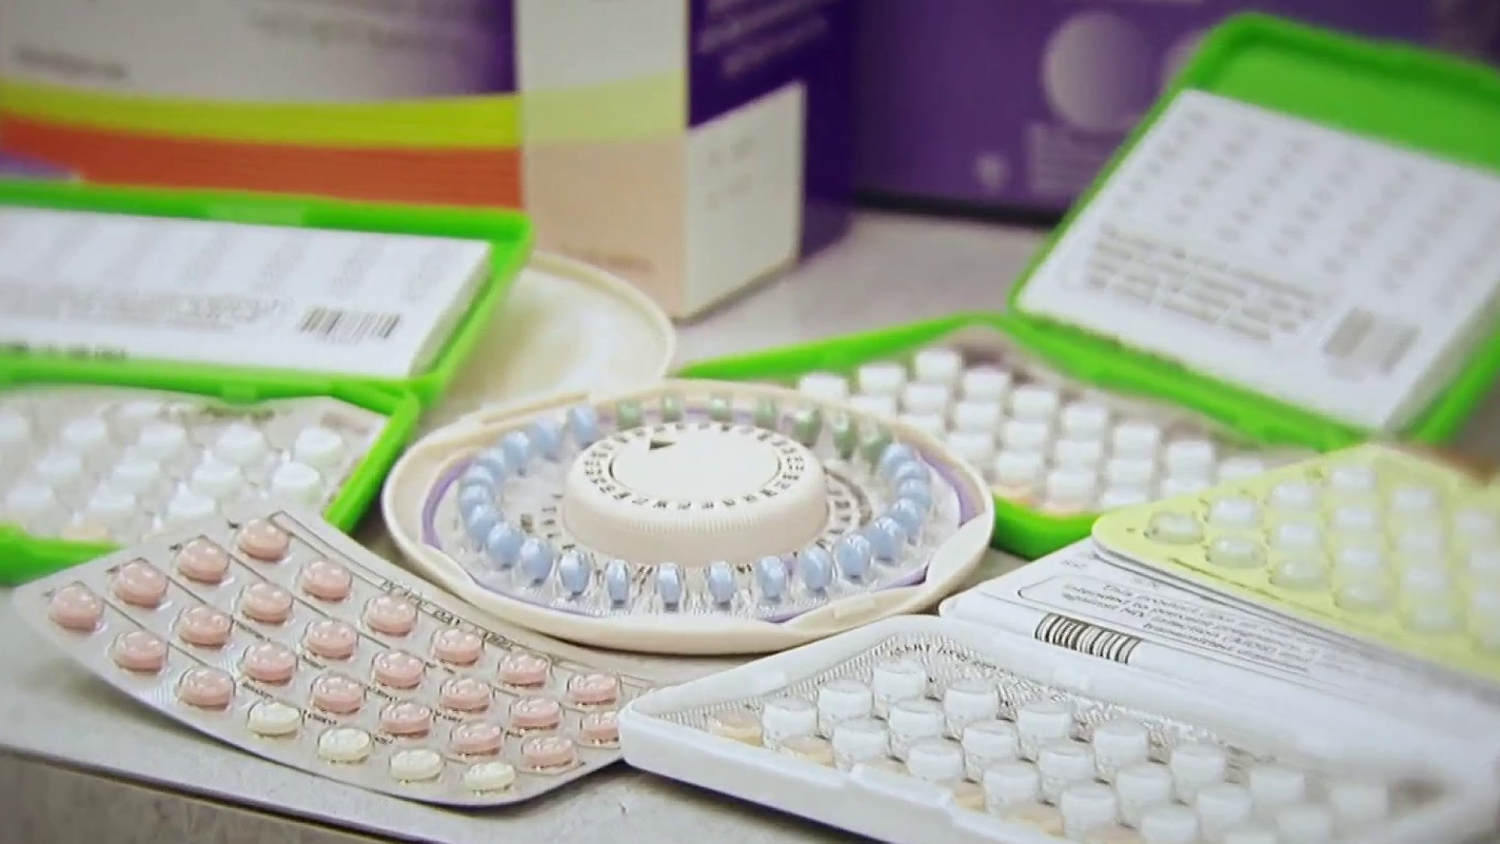 Birth control is a new front in reproductive rights battle